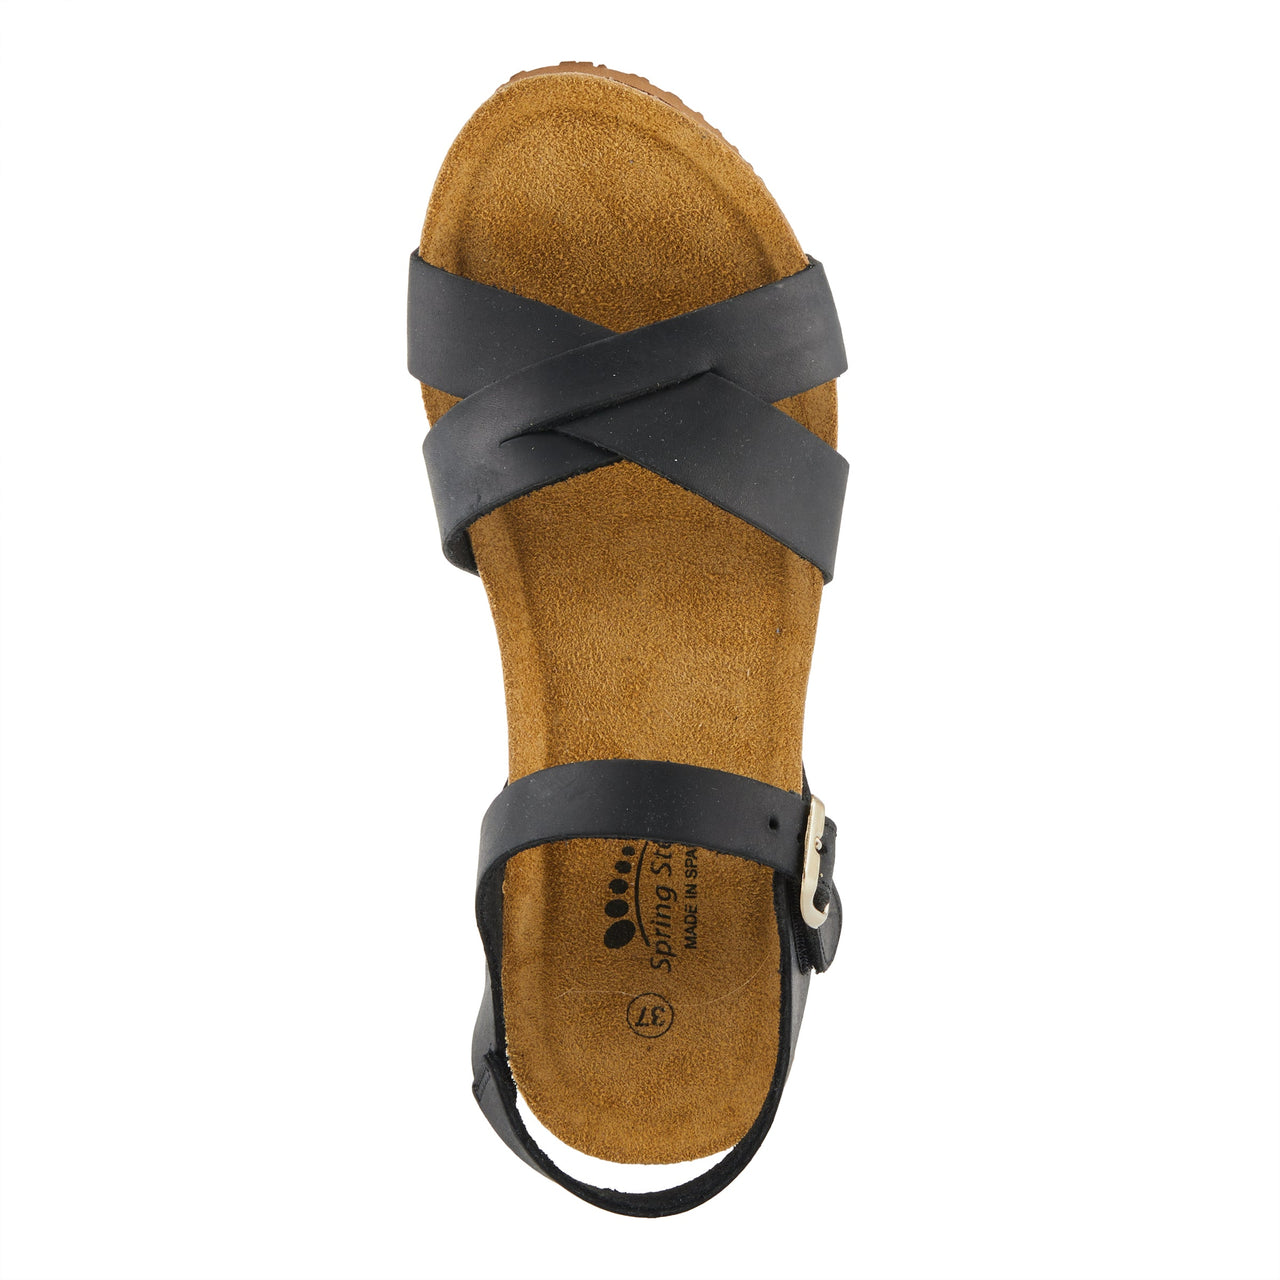 Brown leather Spring Step Burton sandals with adjustable straps and cushioned footbed for all-day comfort and style